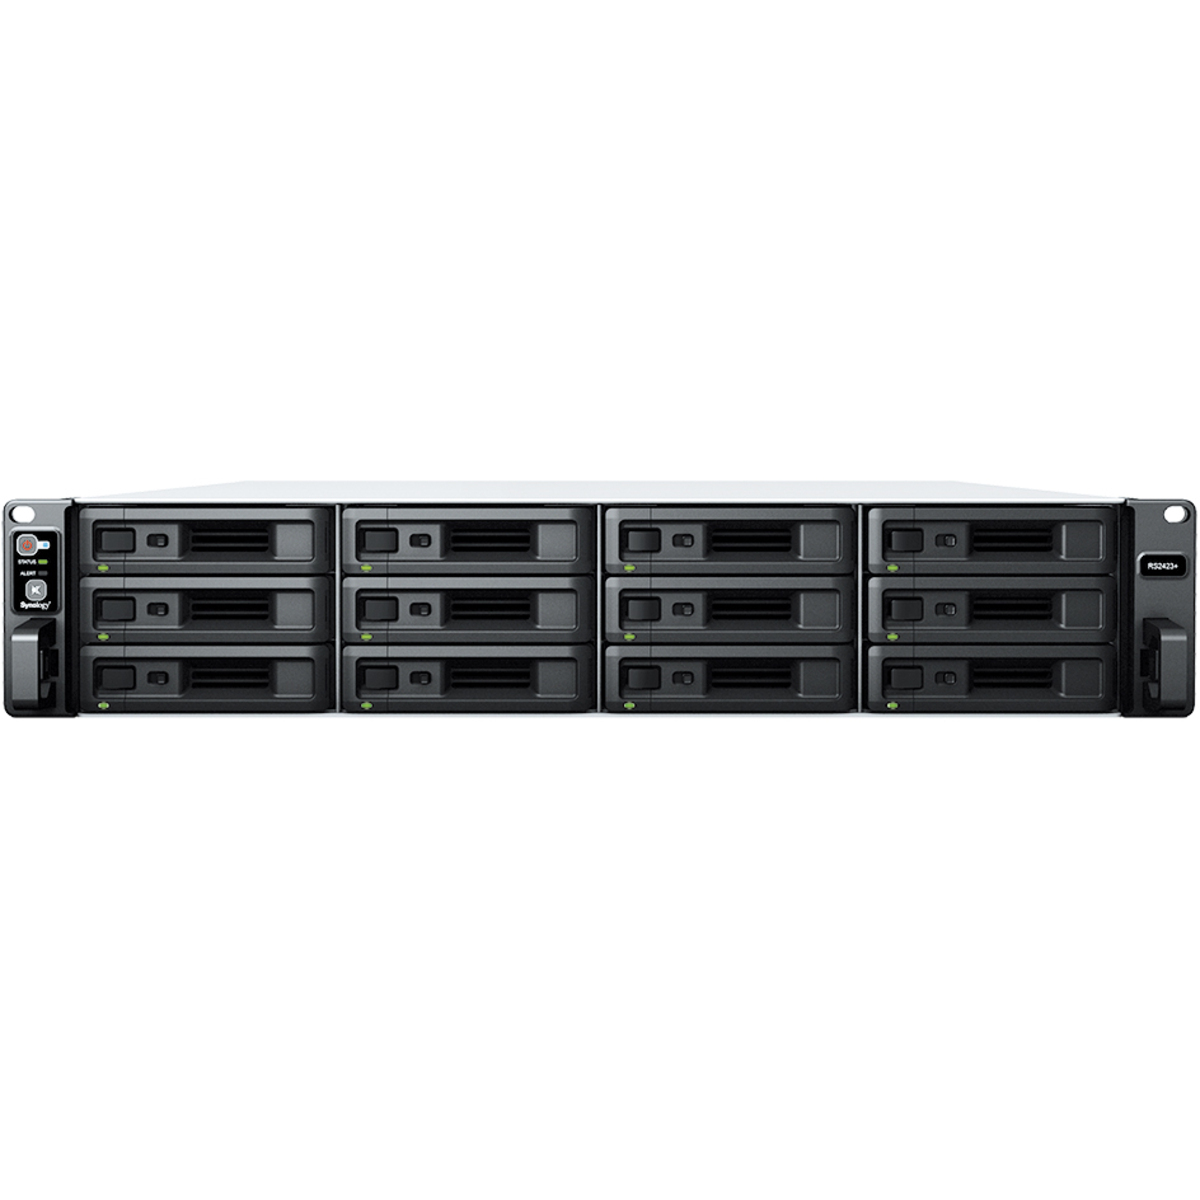 Synology RackStation RS2423RP+ 24tb 12-Bay RackMount Multimedia / Power User / Business NAS - Network Attached Storage Device 12x2tb Seagate IronWolf Pro ST2000NT001 3.5 7200rpm SATA 6Gb/s HDD NAS Class Drives Installed - Burn-In Tested - FREE RAM UPGRADE RackStation RS2423RP+